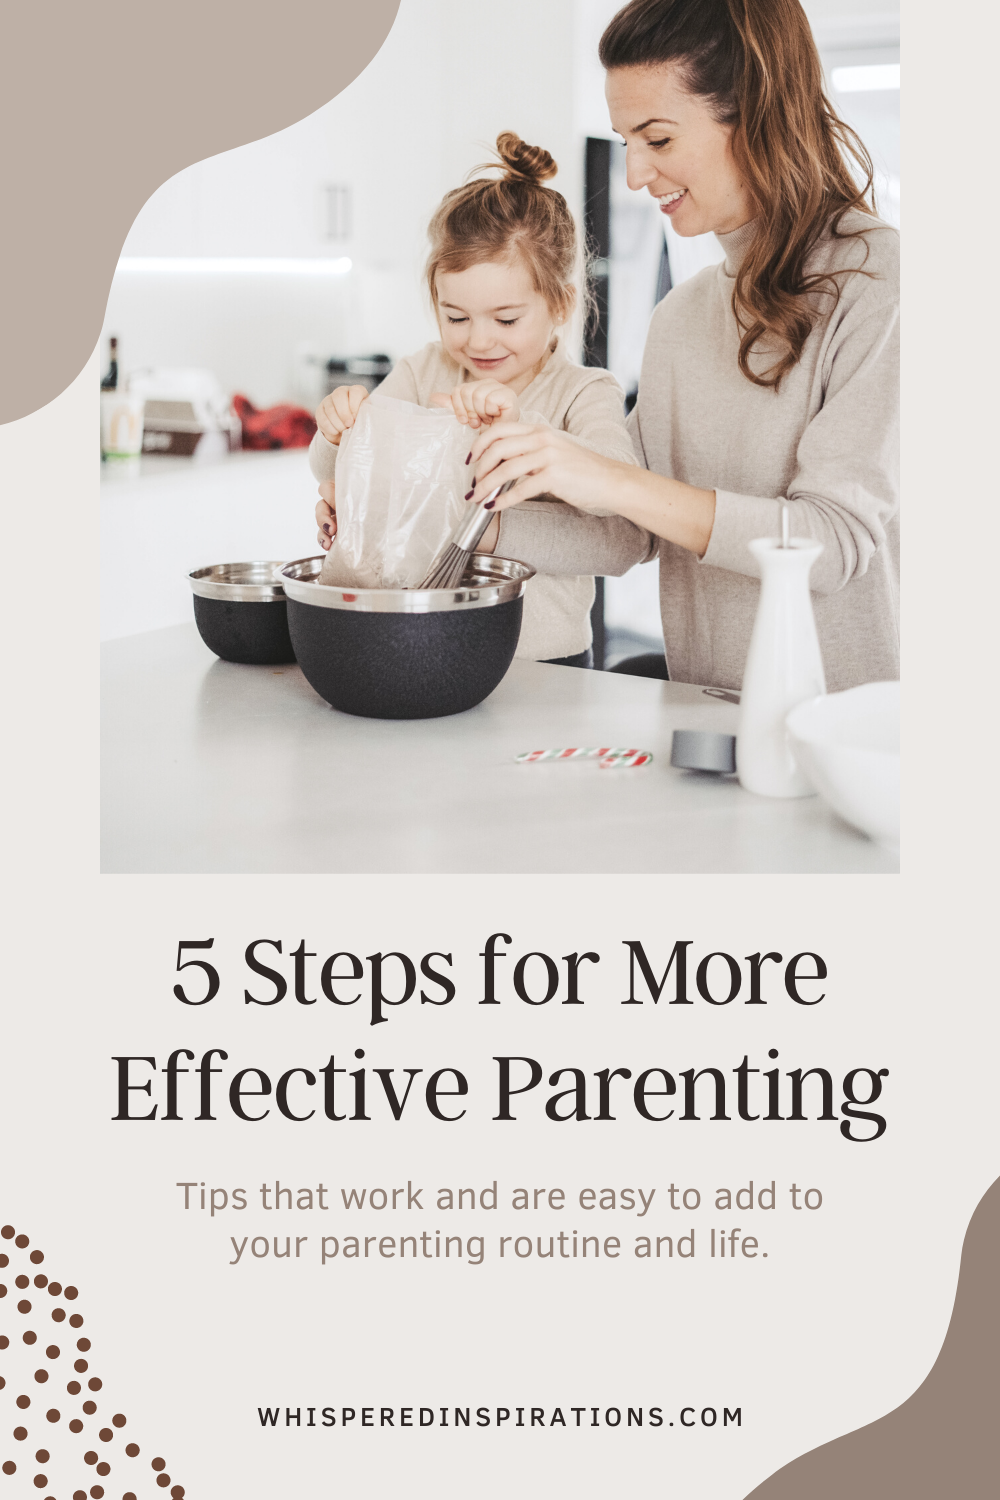 A mother and daughter are in the kitchen baking. They are smiling and happy. This article covers lists 5 steps for more effective parenting. 